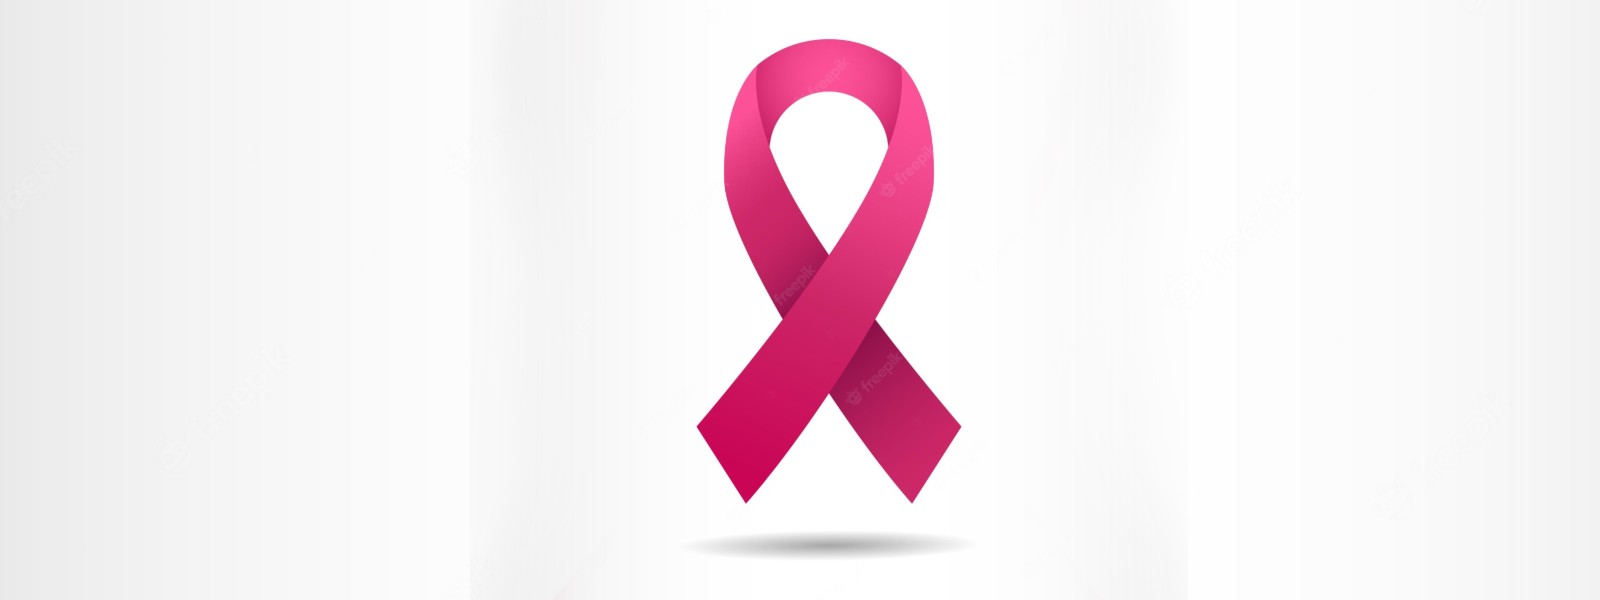 12 breast cancer patients reported daily